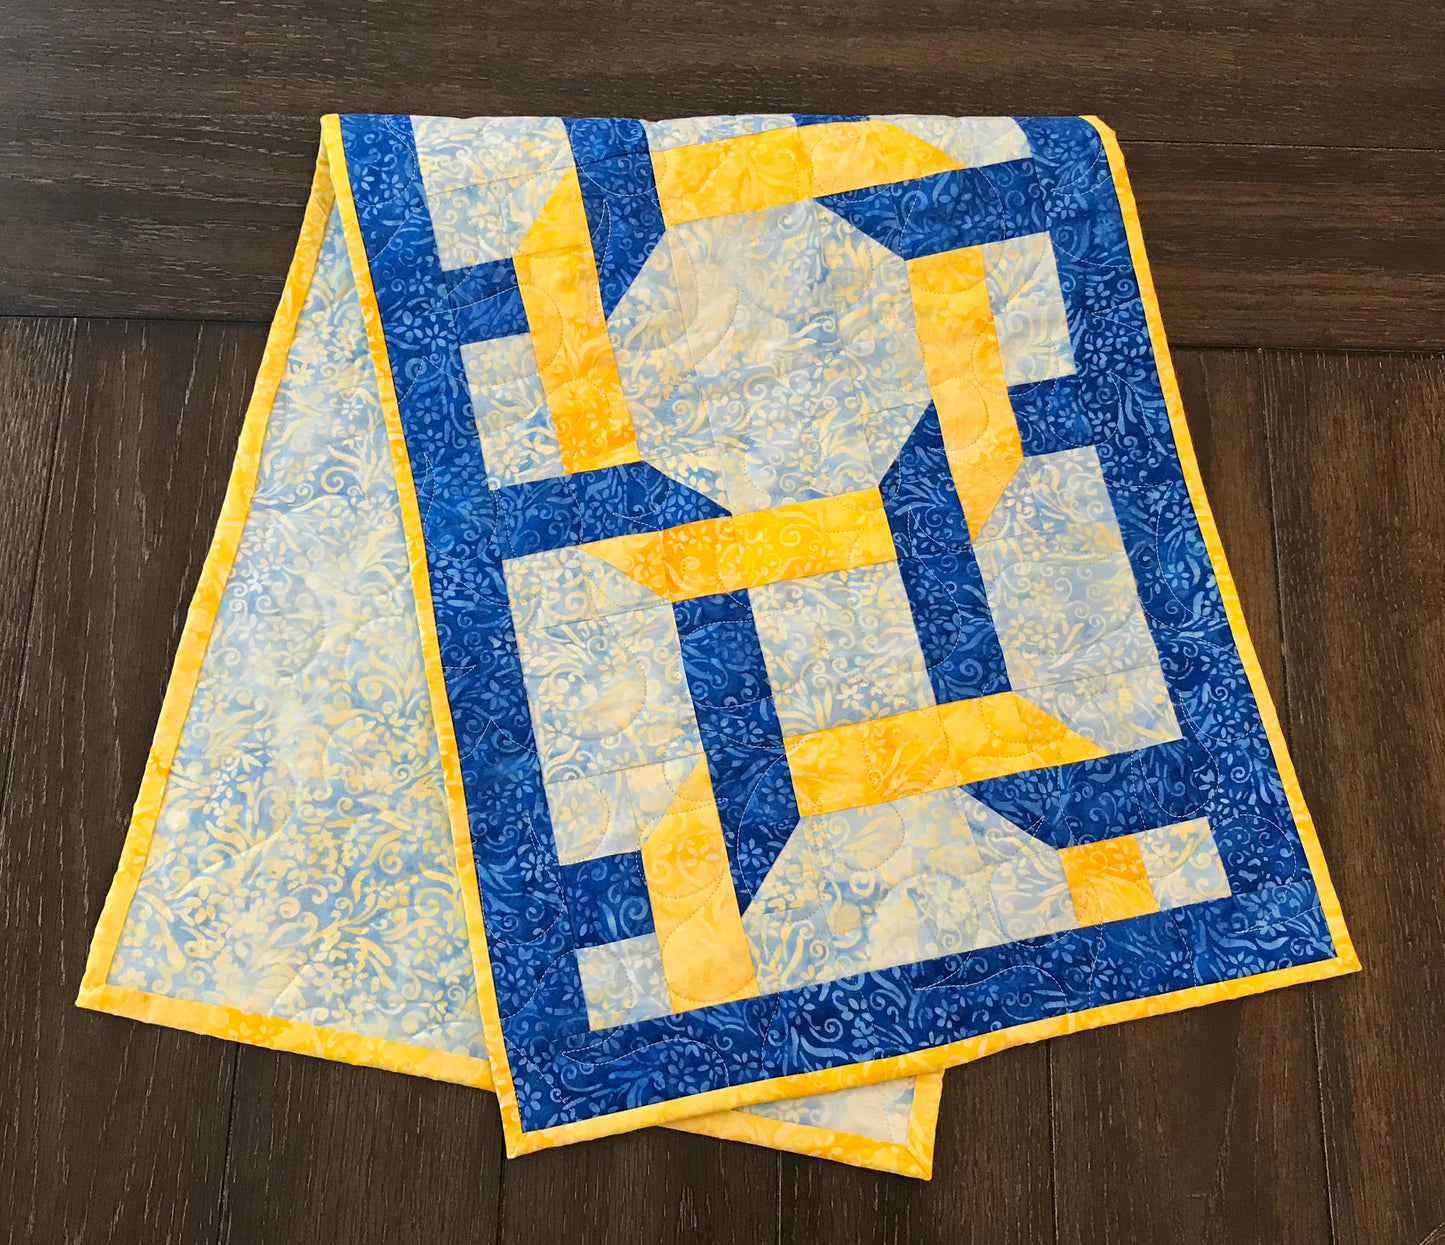 Pattern for blue and yellow table runner with woven corners through three large squares. Woven Squares pattern.